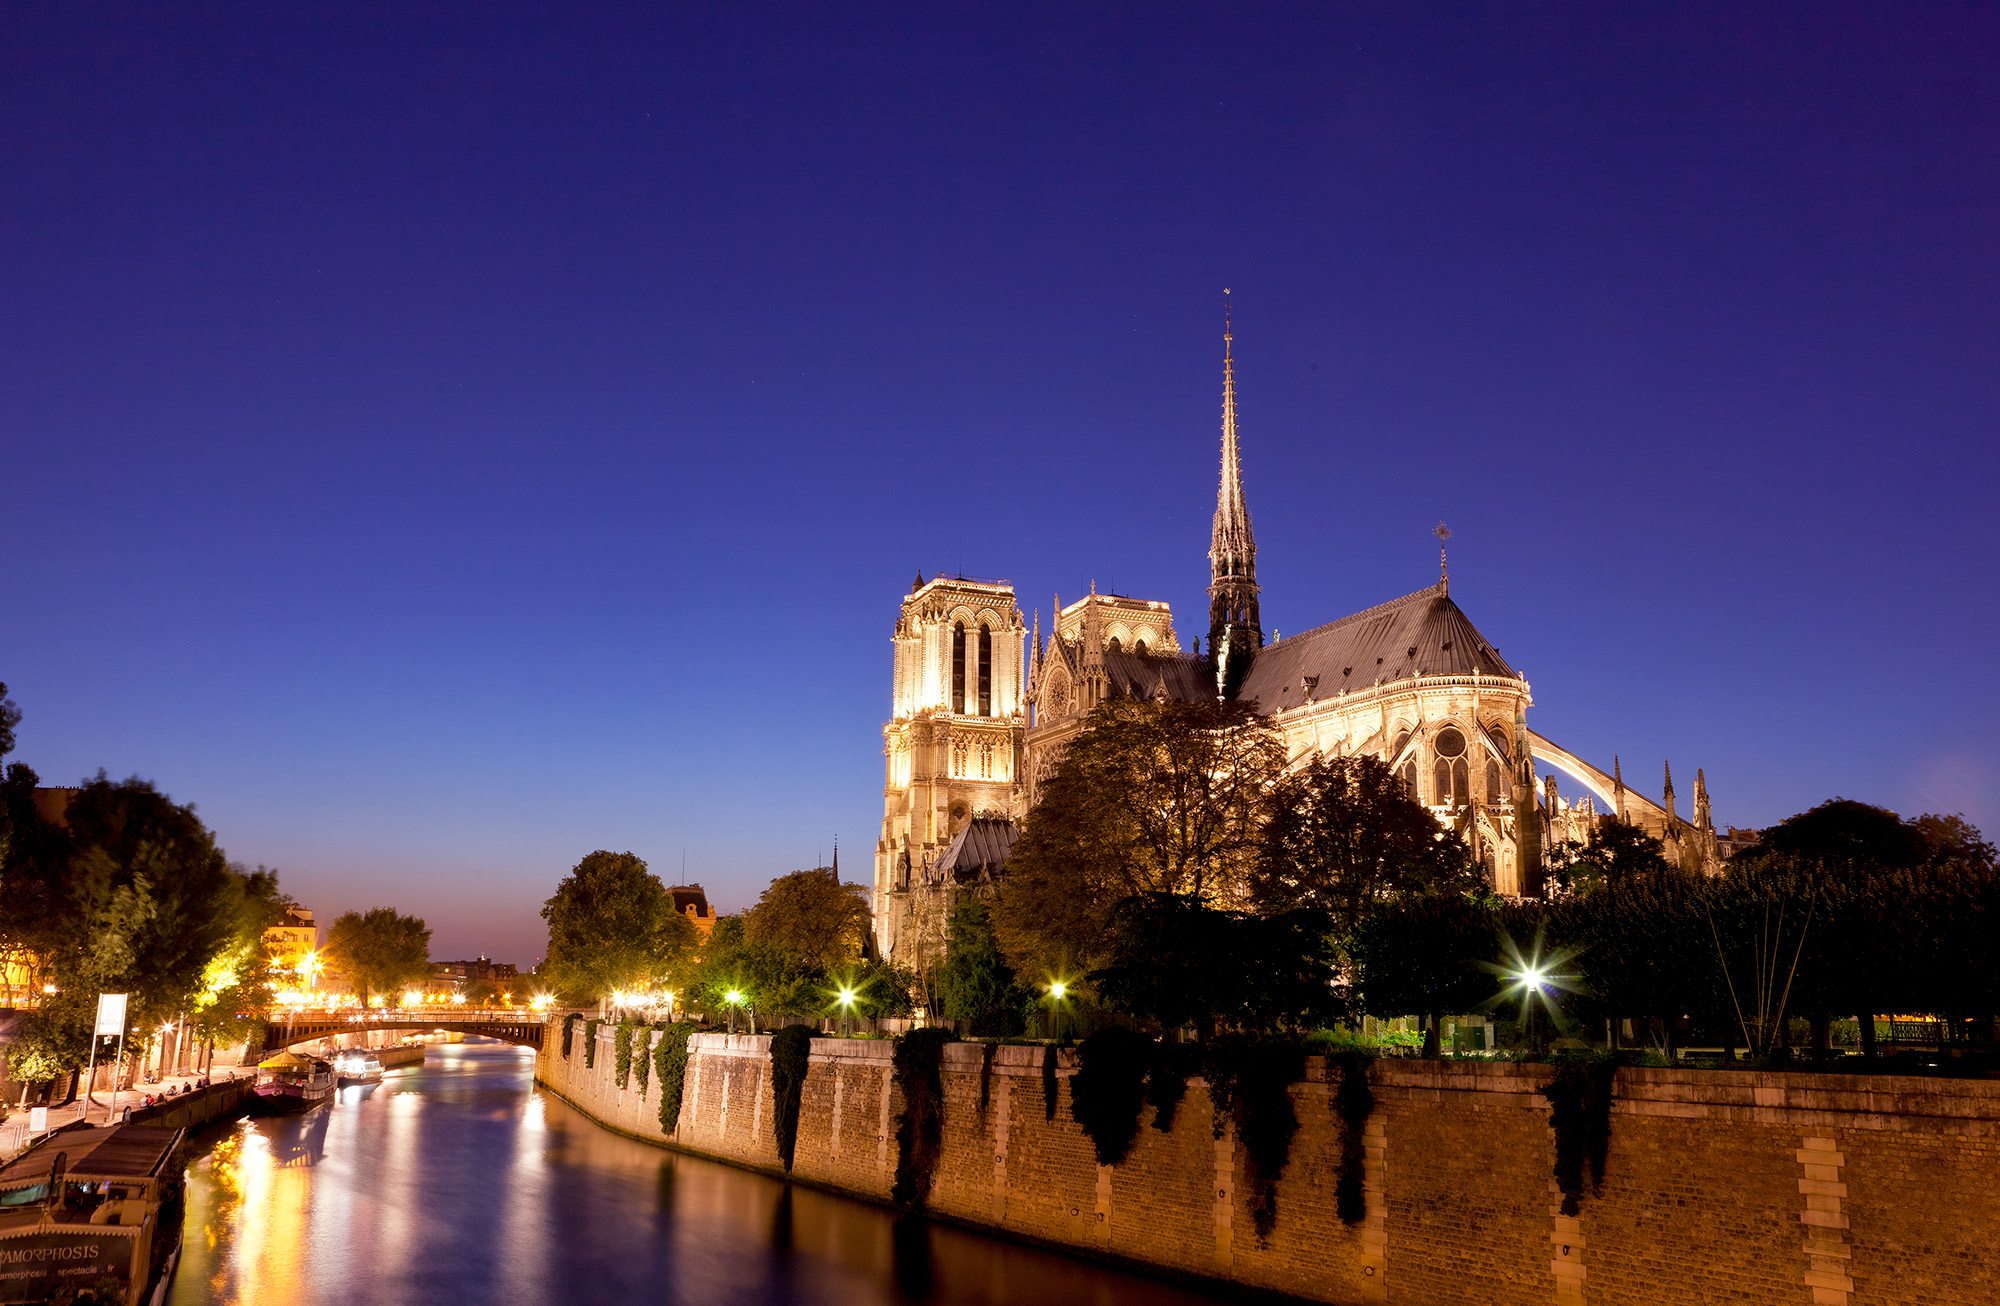 "Notre Dame Illumination" captures the iconic Notre Dame Cathedral in the enchanting blue hour. Taken from across the Seine River...